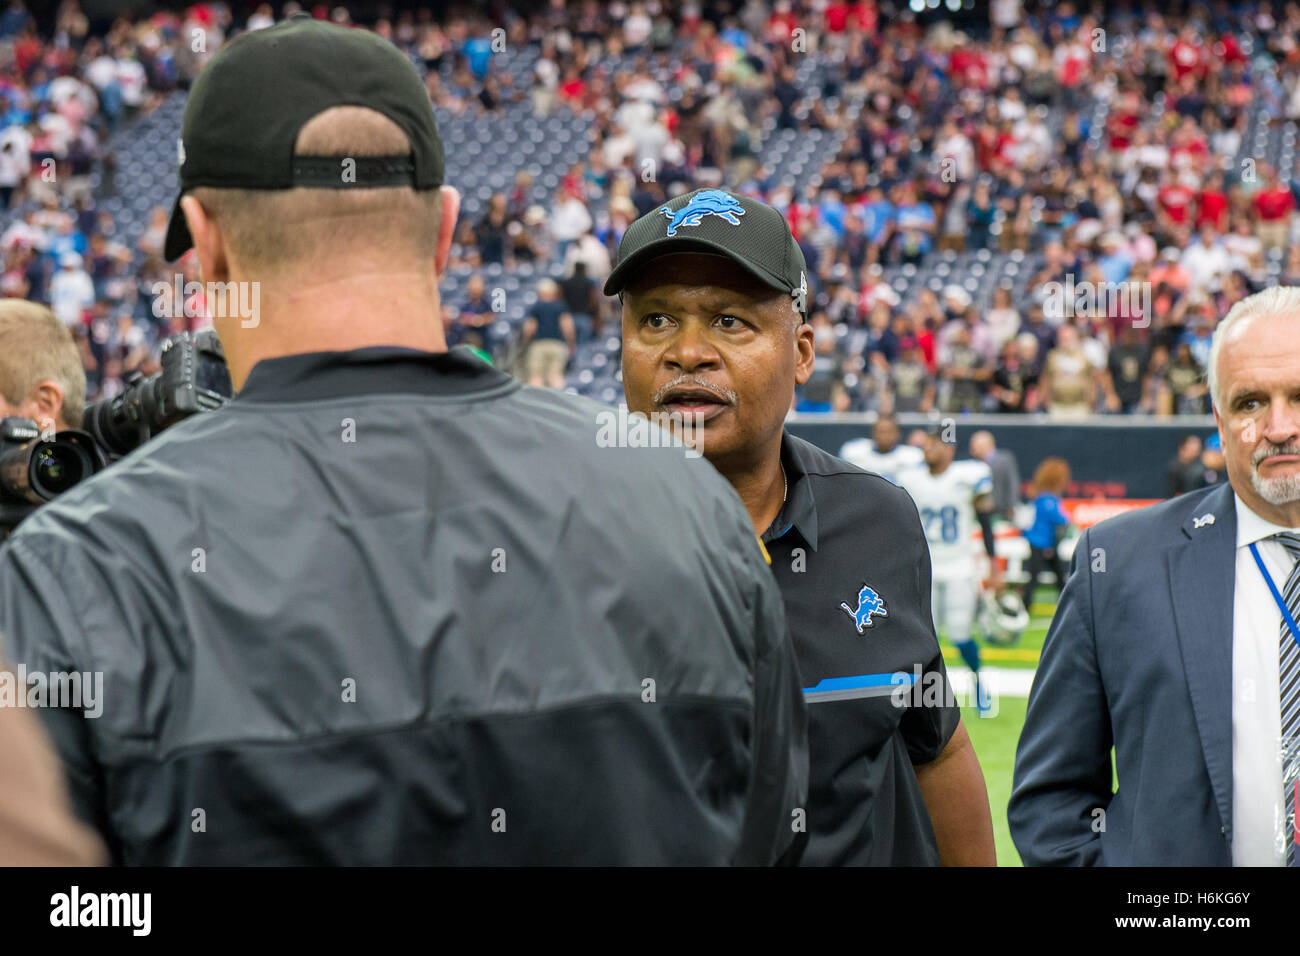 Houston, Texas, USA. 30th Oct, 2016. Detroit Lions head coach Jim Caldwell greets Houston Texans head coach Bill O'Brien after an NFL game between the Houston Texans and the Detroit Lions at NRG Stadium in Houston, TX on October 30th, 2016. The Texans won the game 20-13. Credit:  Trask Smith/ZUMA Wire/Alamy Live News Stock Photo